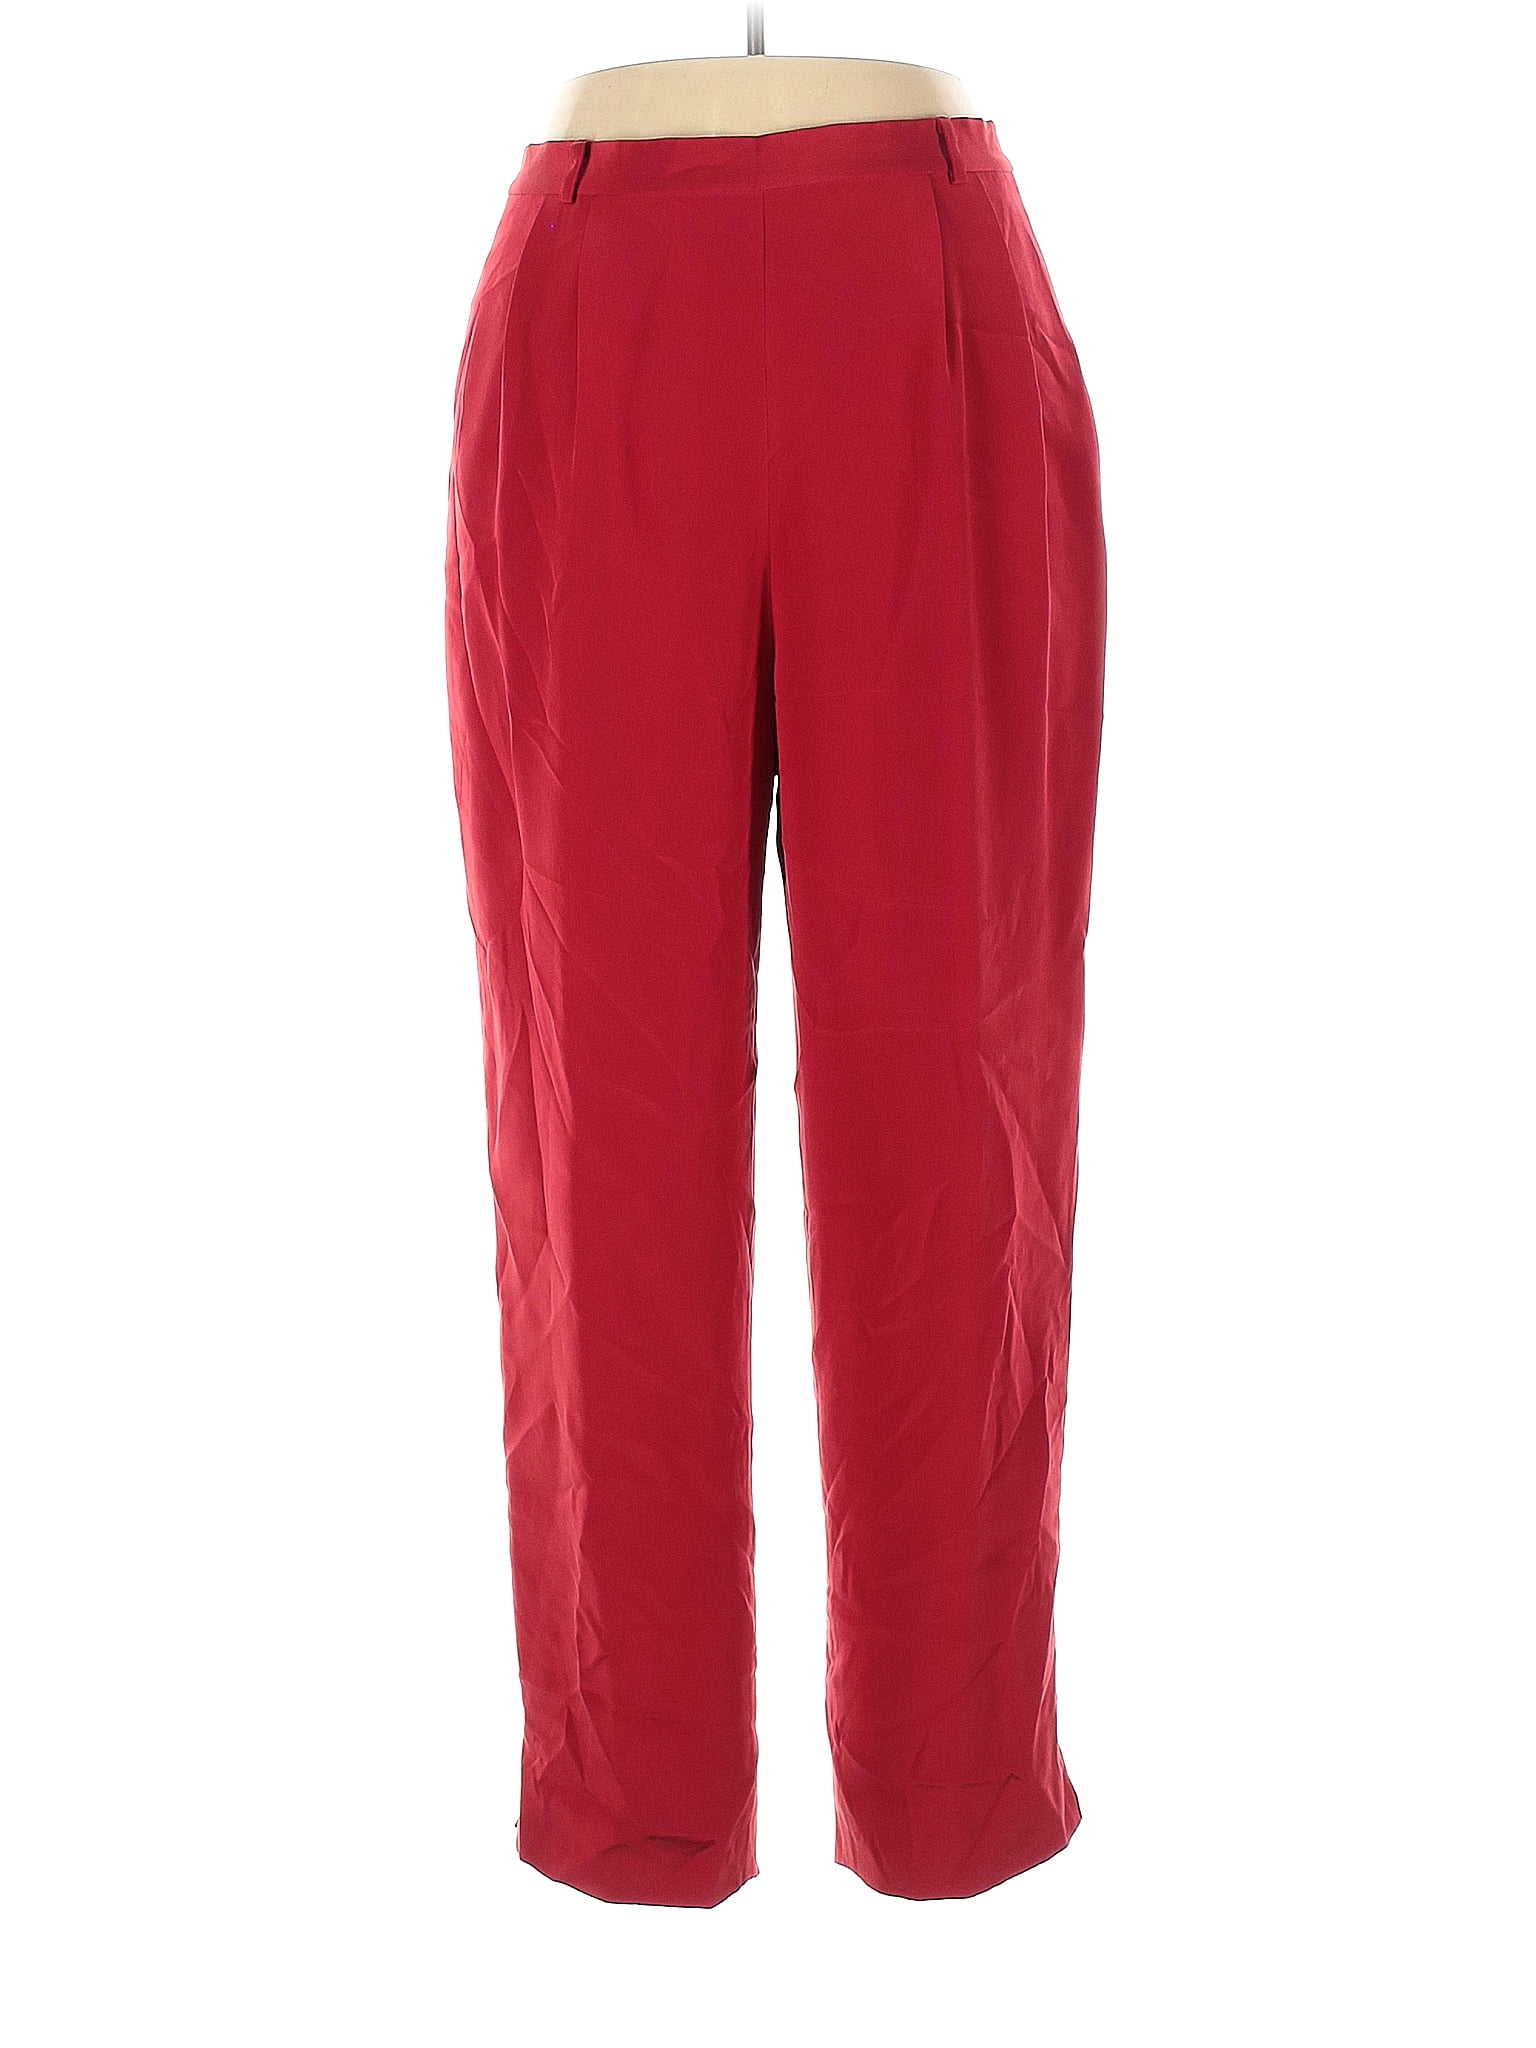 Doncaster 100% Silk Solid Red Silk Pants Size 16 - 85% off | thredUP